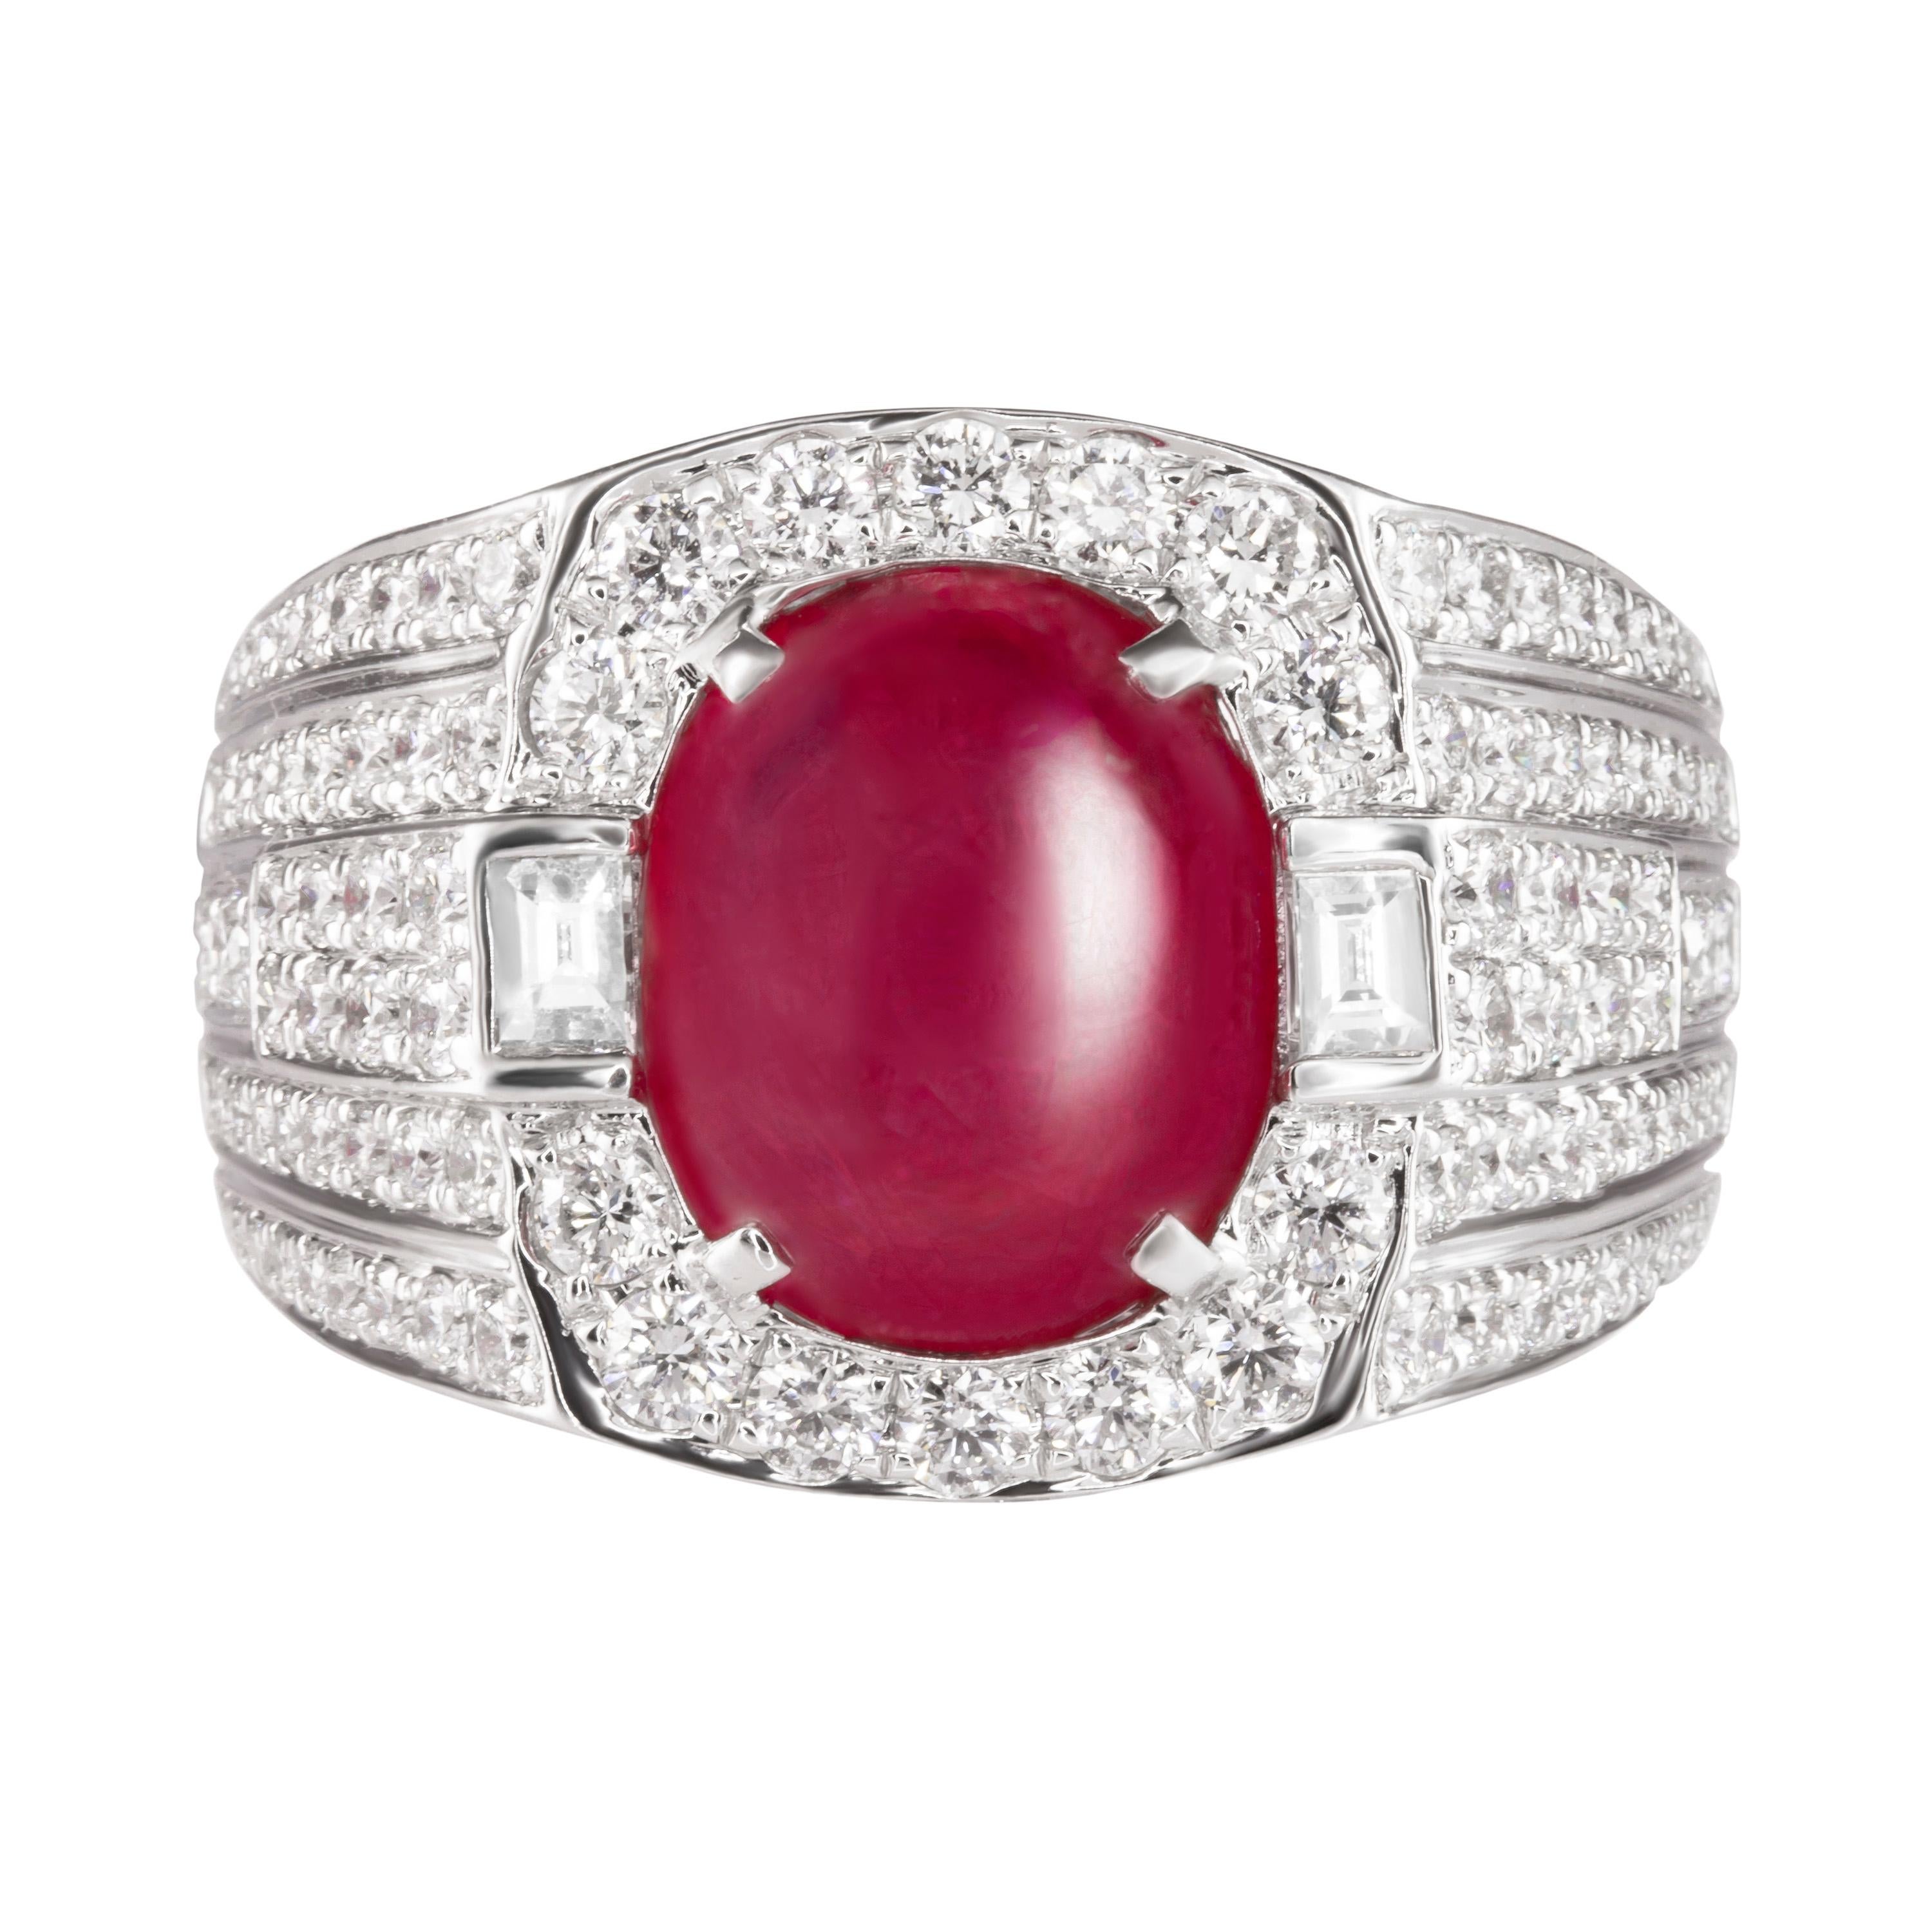 Cast from 18K white gold and adorned with 2.64 carats of sparkling baguette and round diamonds, this ring has a 6.85 carat cabochon ruby at the center.  Currently a ring size US 9.  For other sizes, please contact seller.  

Composition: 
18K White